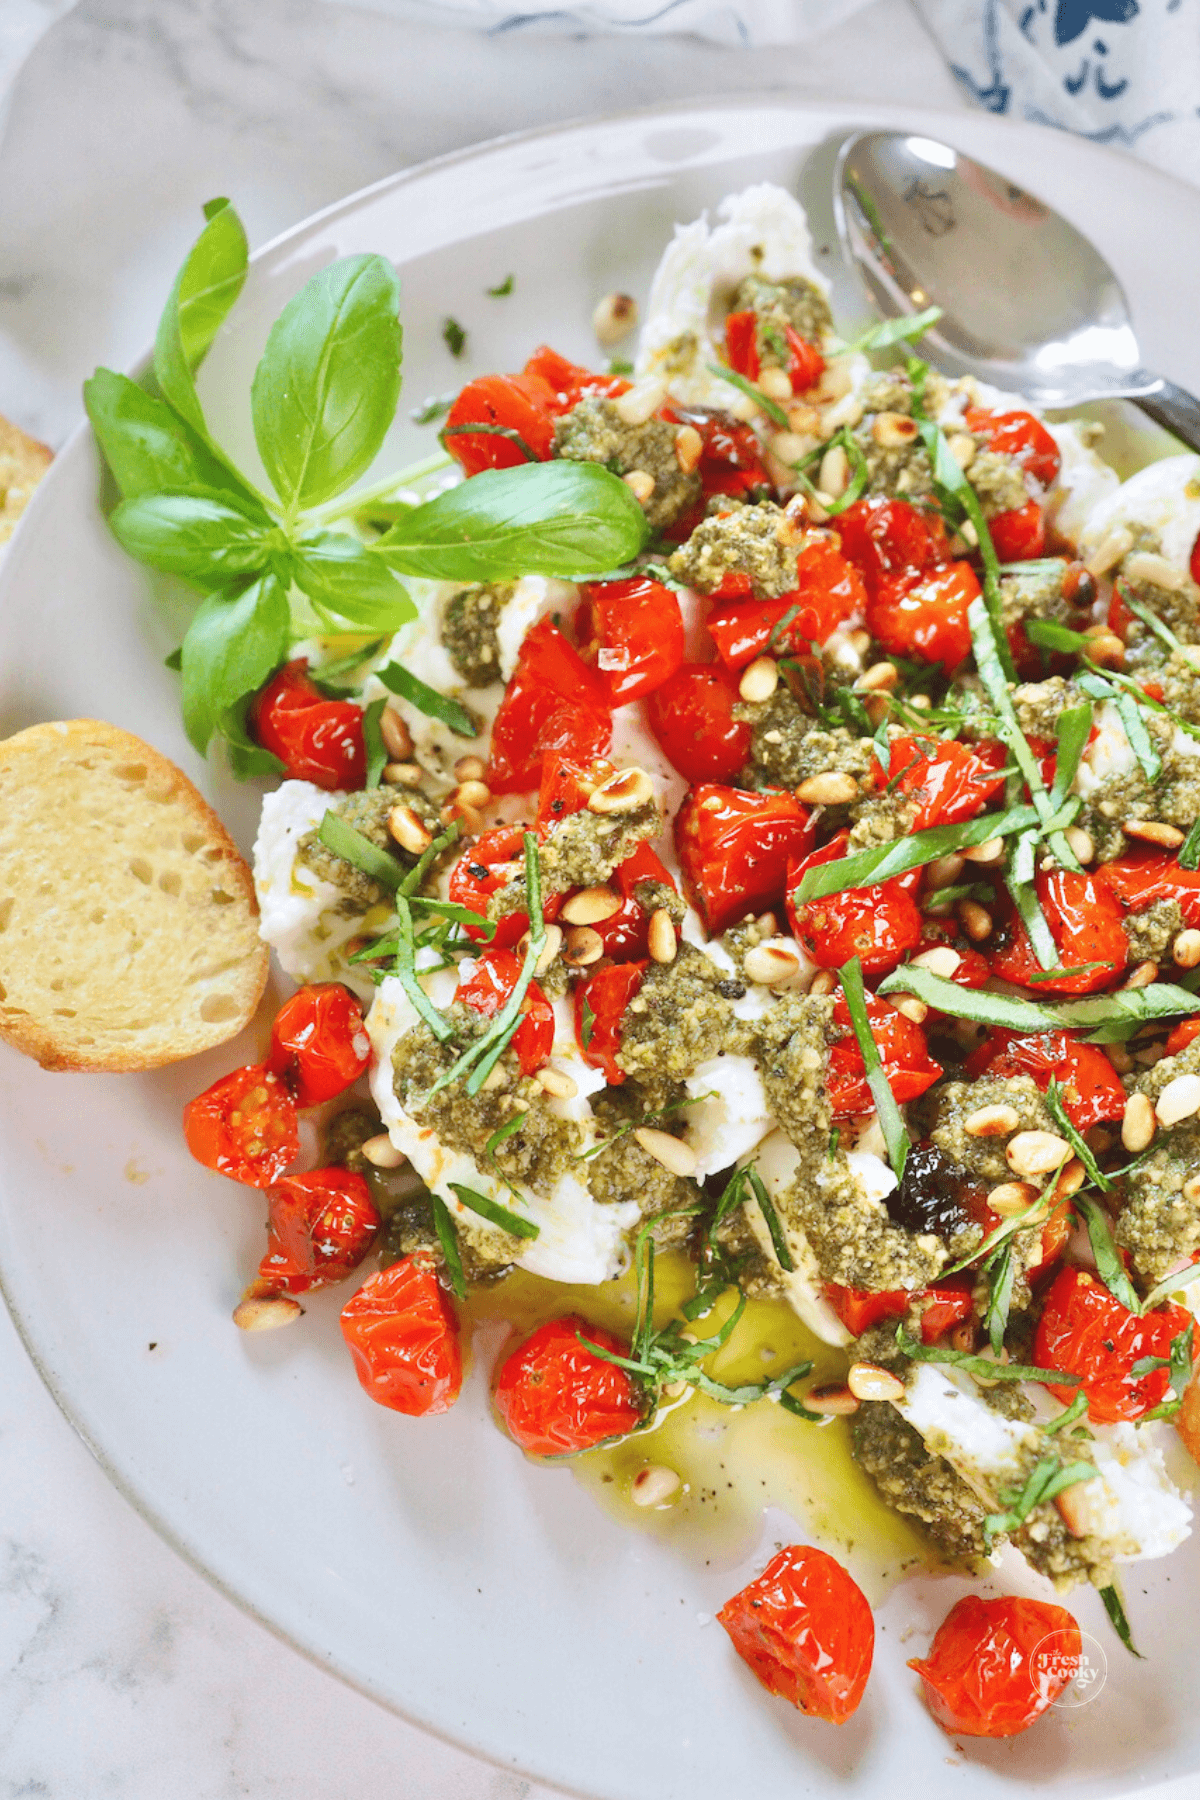 Plate filled with burrata cheese, pesto and roasted tomatoes surrounded by crostini for dipping.